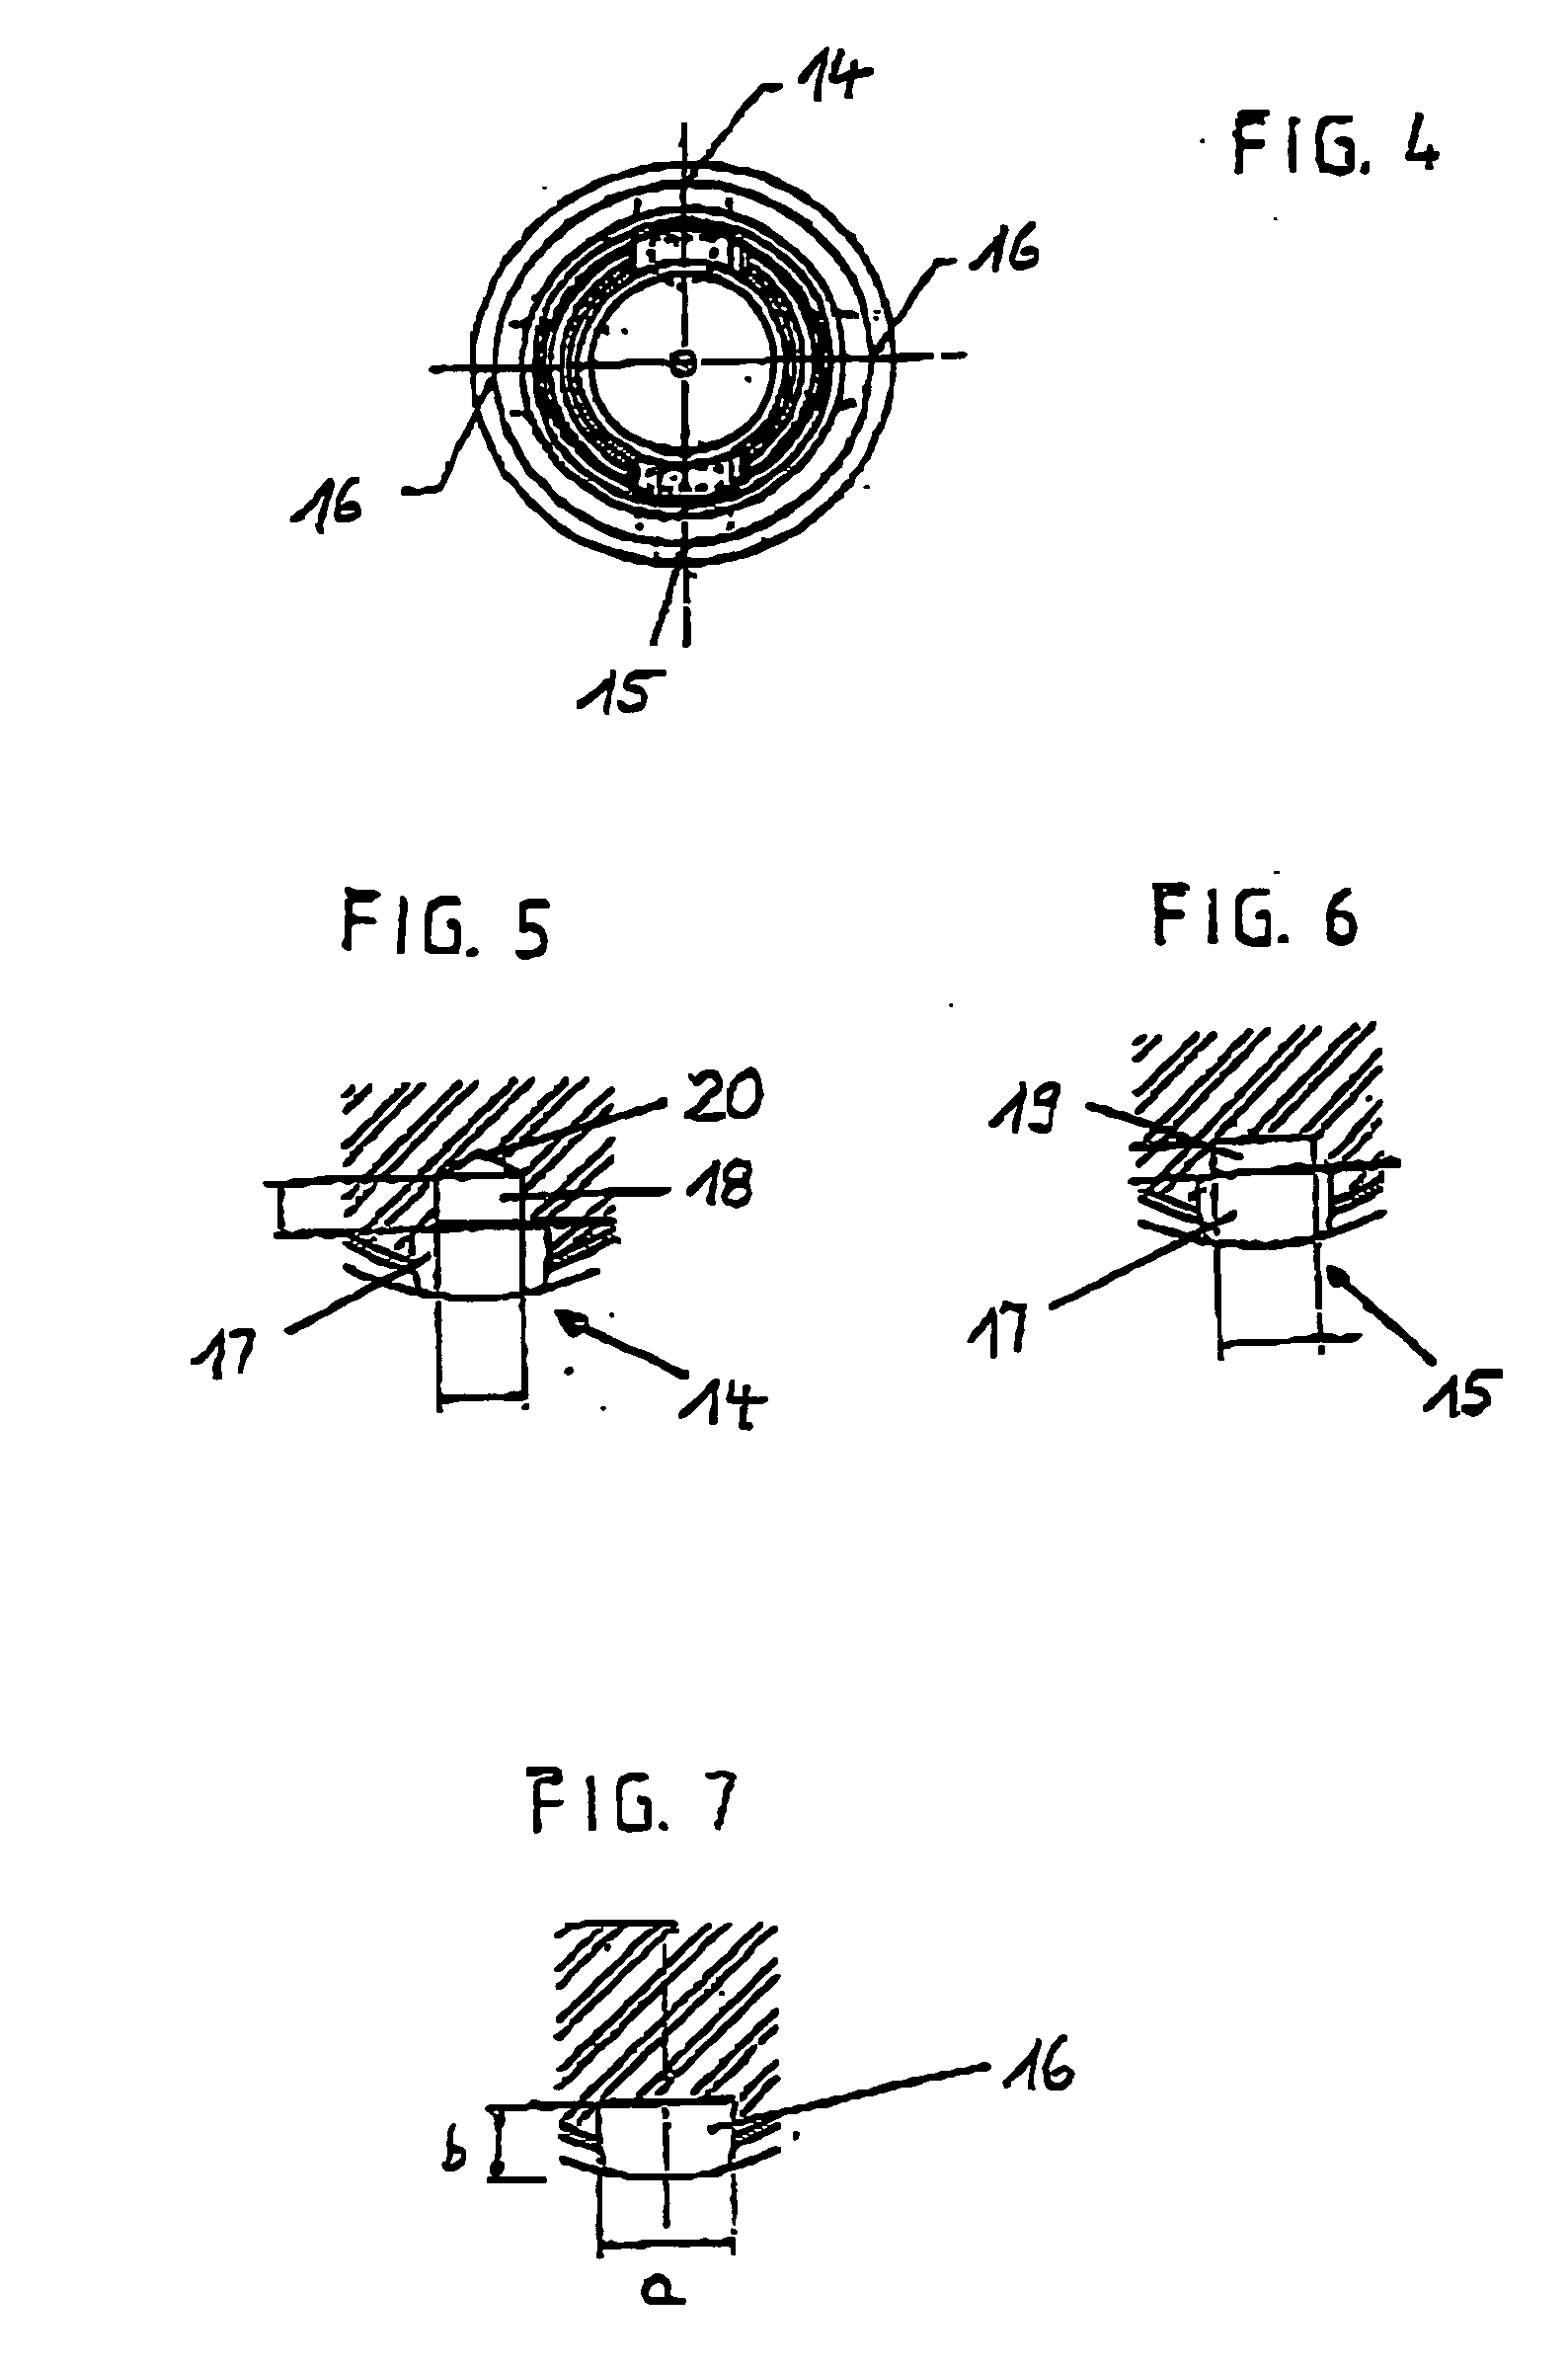 Tool coupler for connecting tool heads, such as drills, reamers, millers, turn-cutters, dies, and rams, to a tool holder